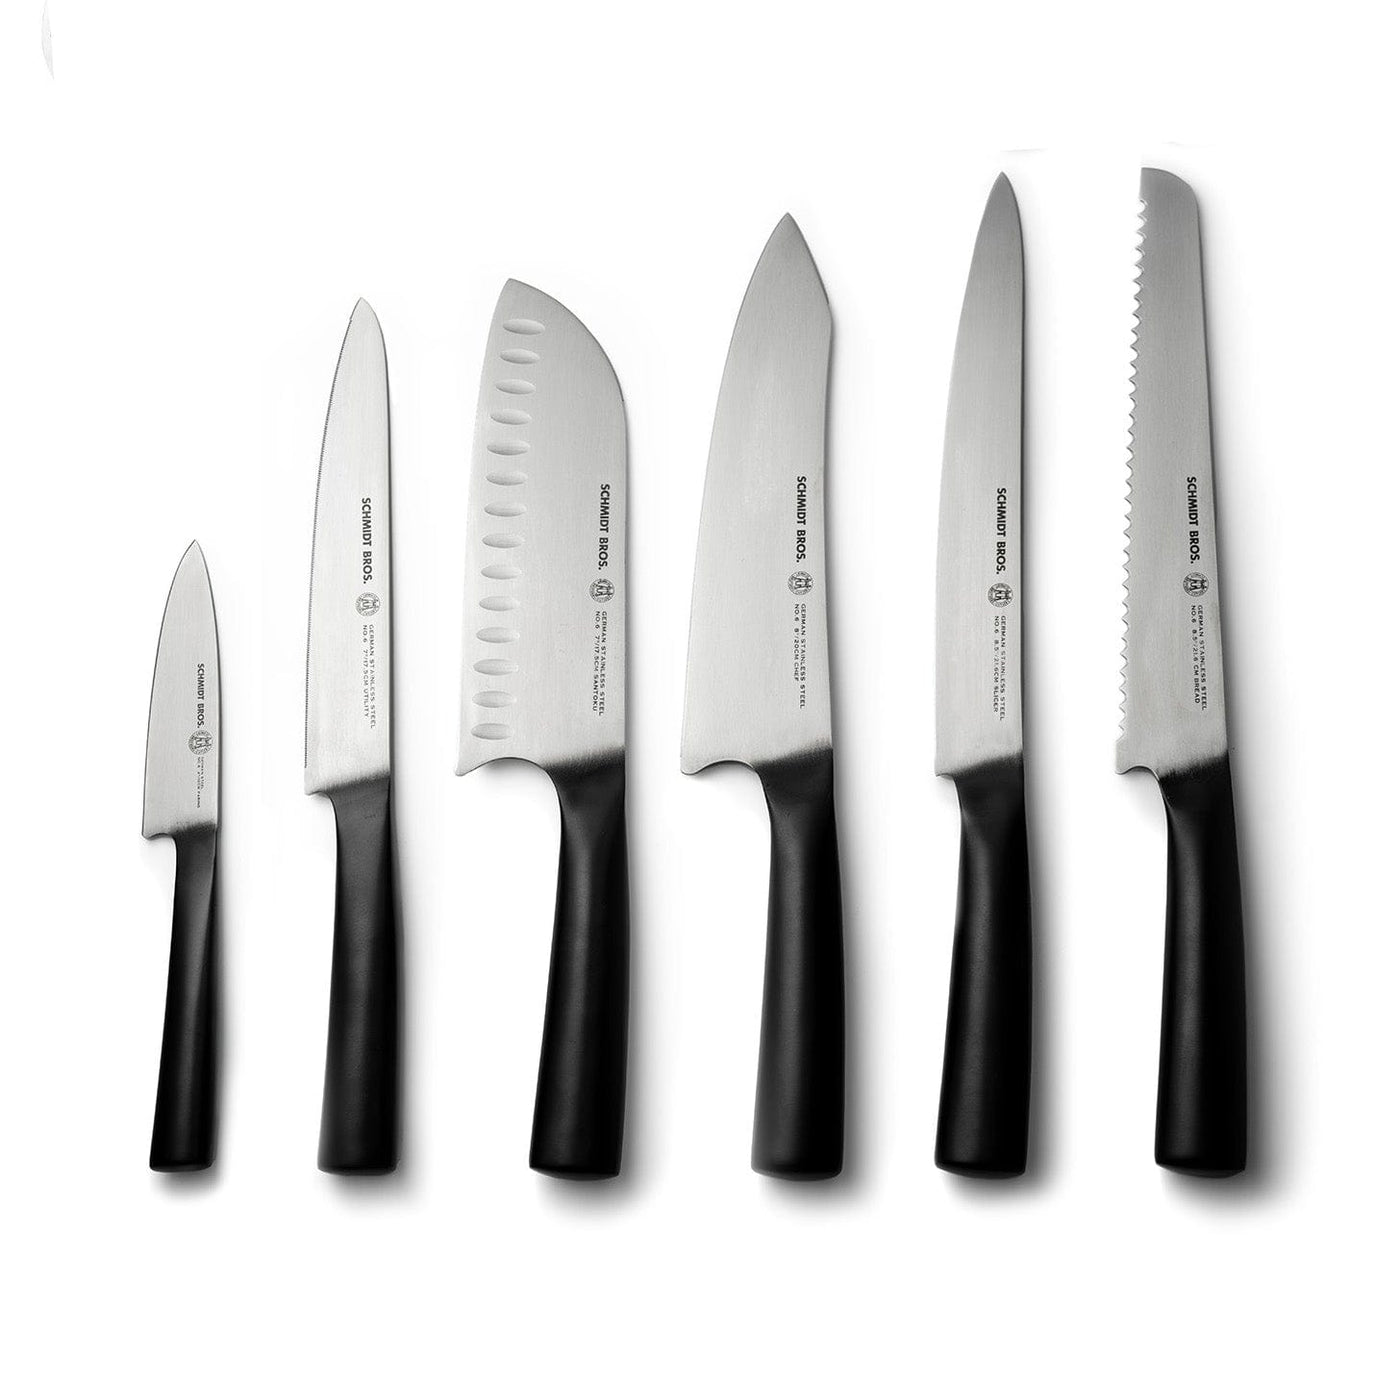 https://schmidtbrothers.com/cdn/shop/files/schmidt-brothers-kitchen-cutlery-schmidt-brothers-carbon-6-7-piece-knife-set-high-carbon-stainless-steel-cutlery-with-acacia-and-acrylic-magnetic-knife-block-30743433347133_1400x.jpg?v=1684153902